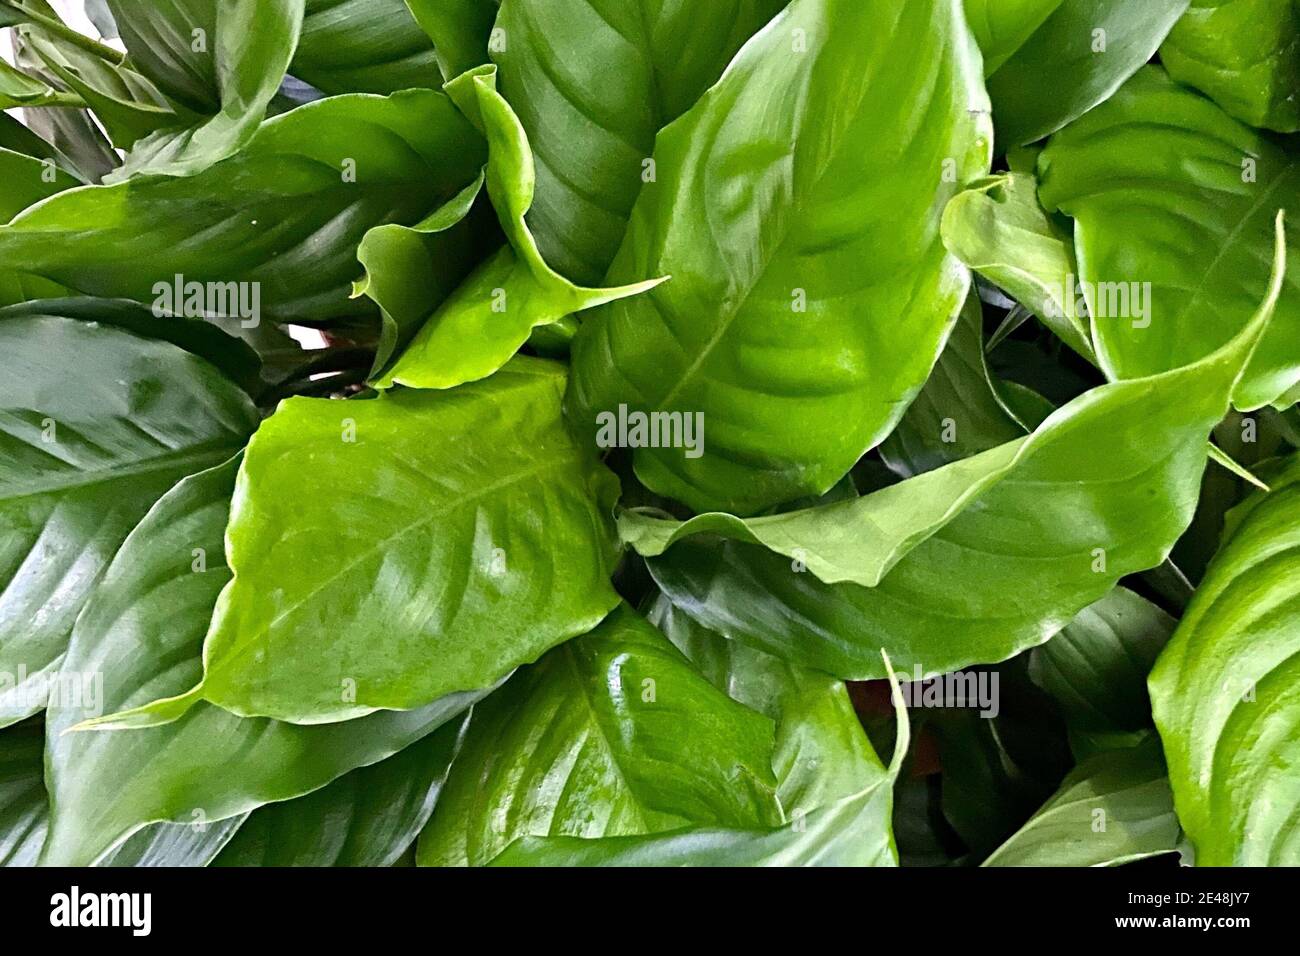 Closeup shot of fresh green Chinese Evergreen plant leaves Stock Photo